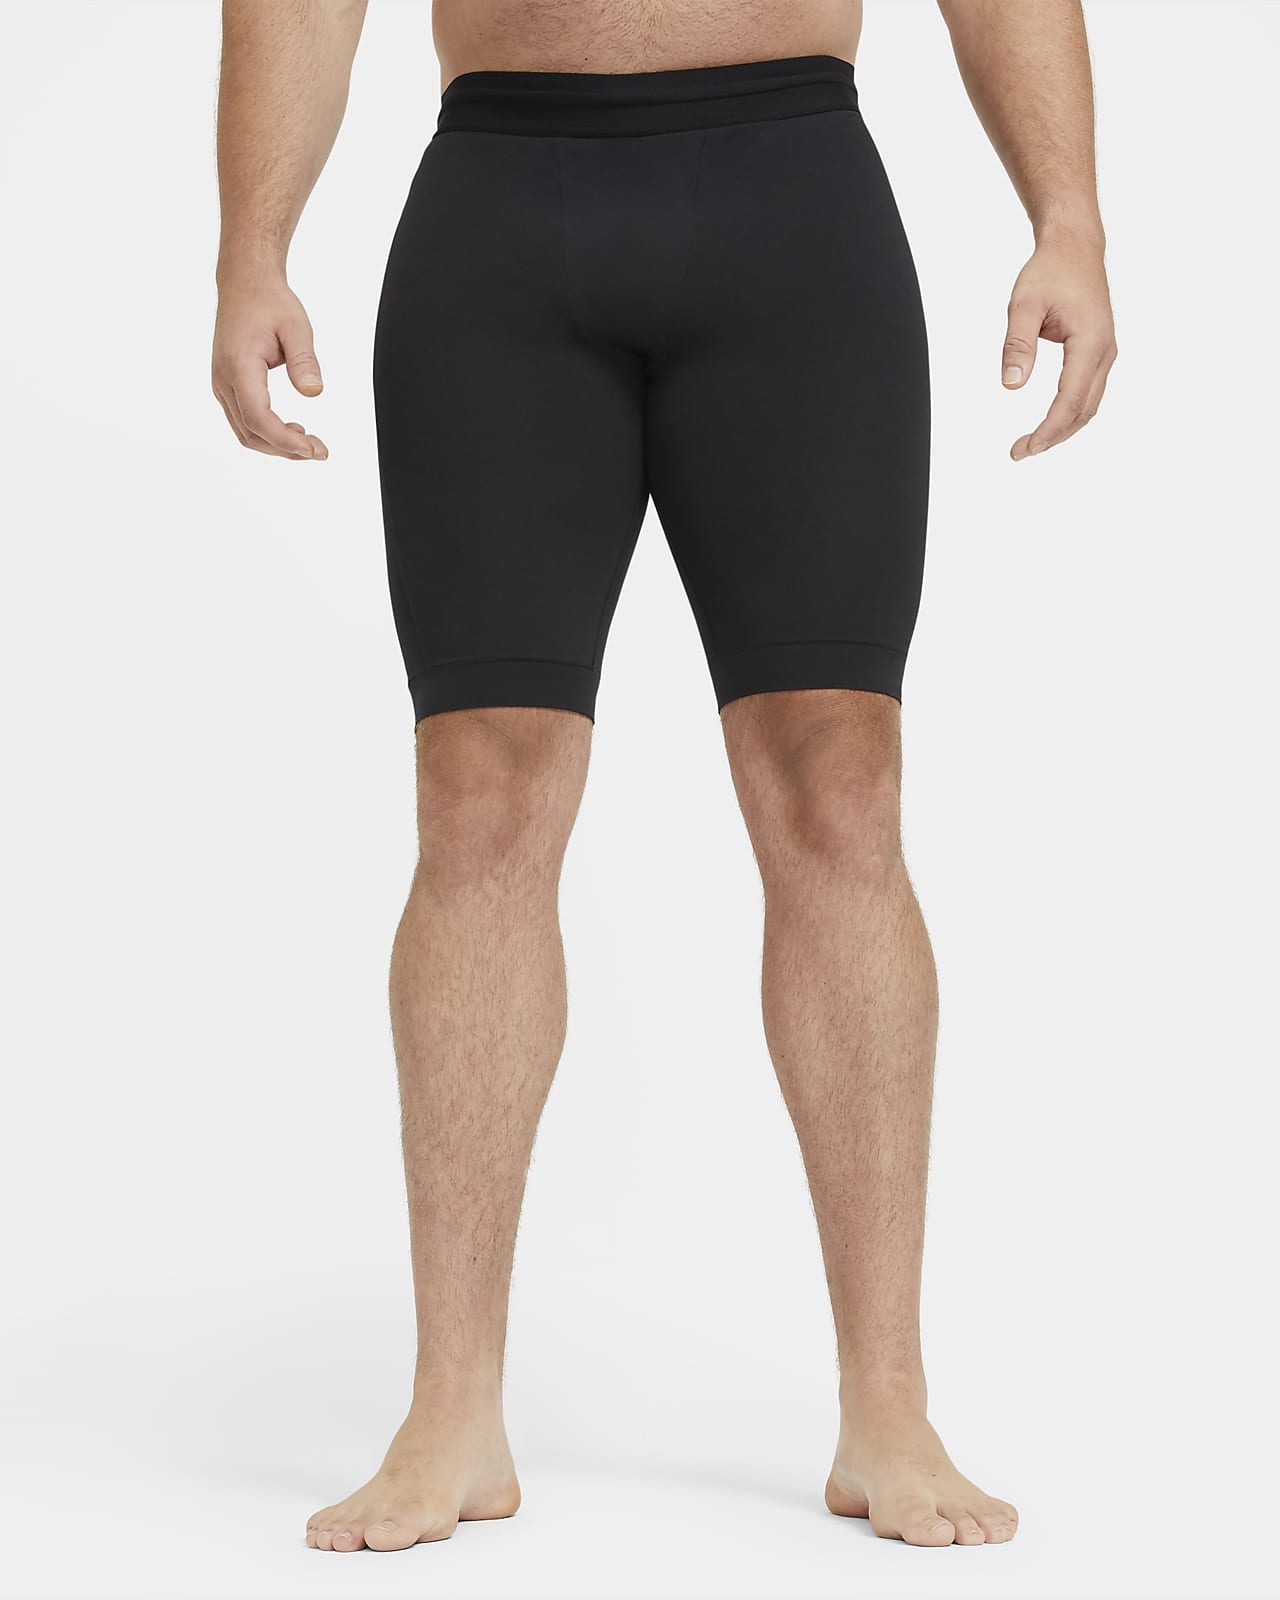 M&S&W Mens Soft Mesh Dry Compression Yoga Workout Tight Shorts